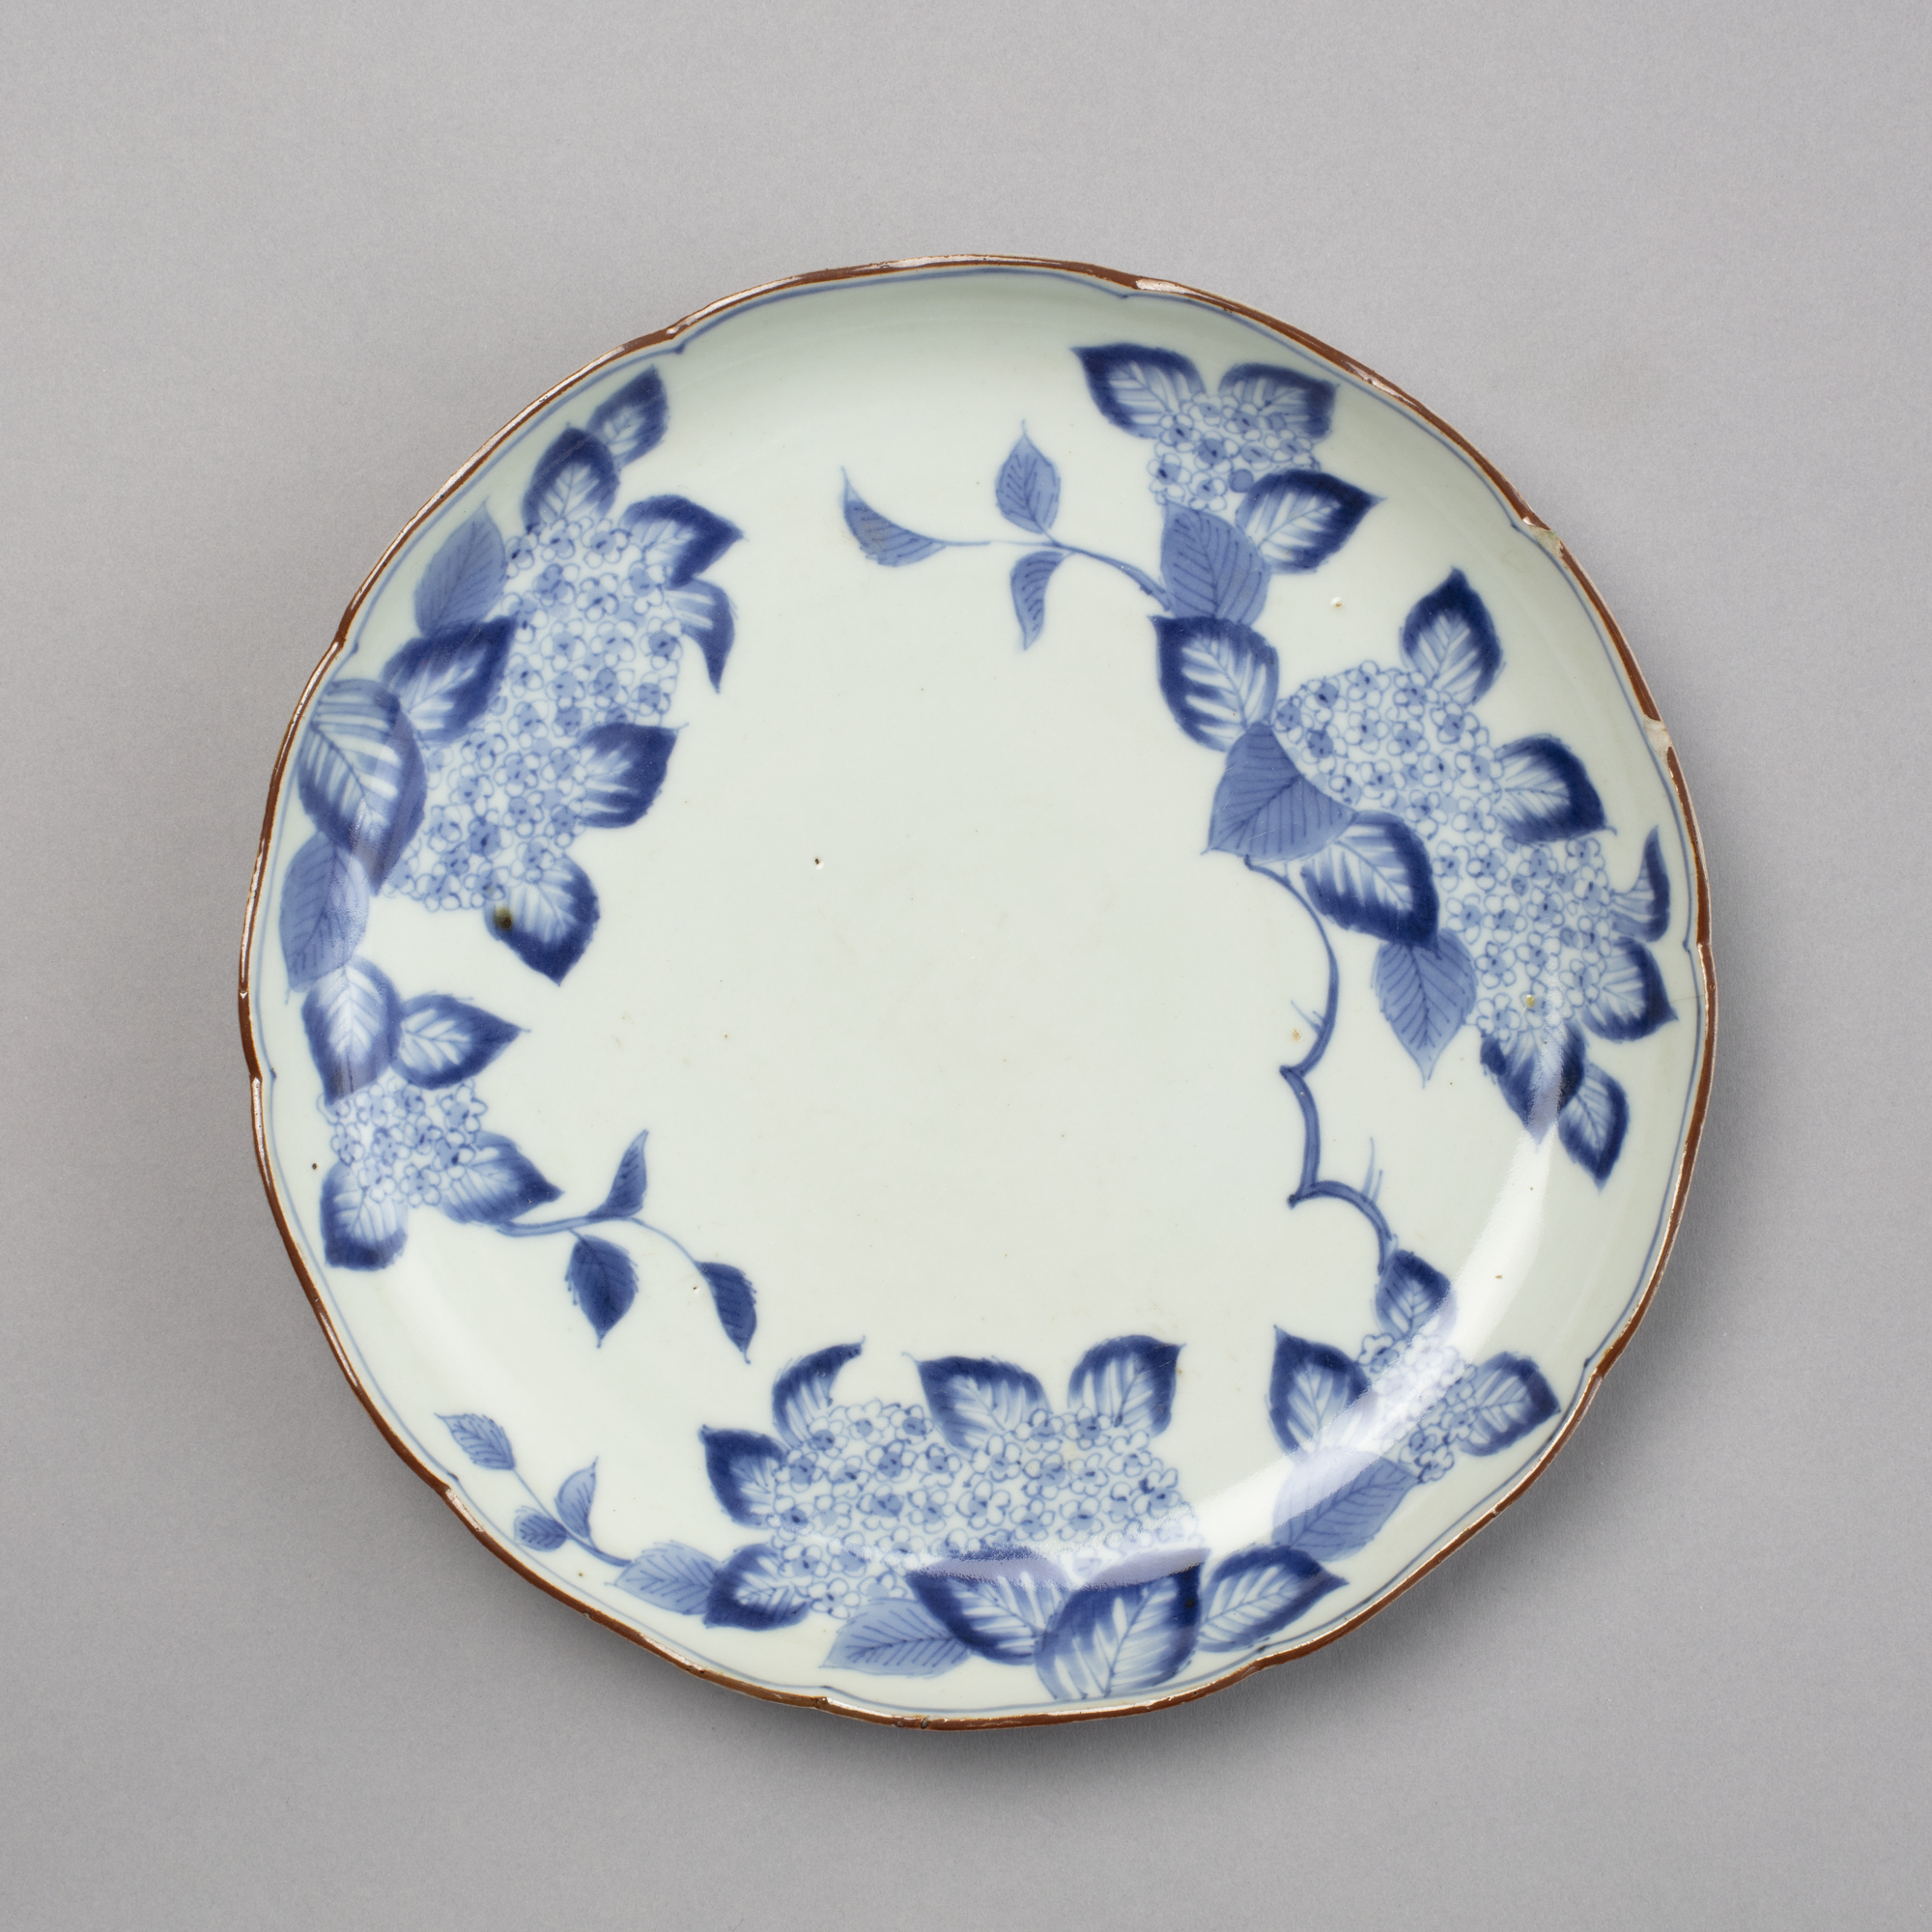 Dish with hydrangea design in blue on white with a gold edge